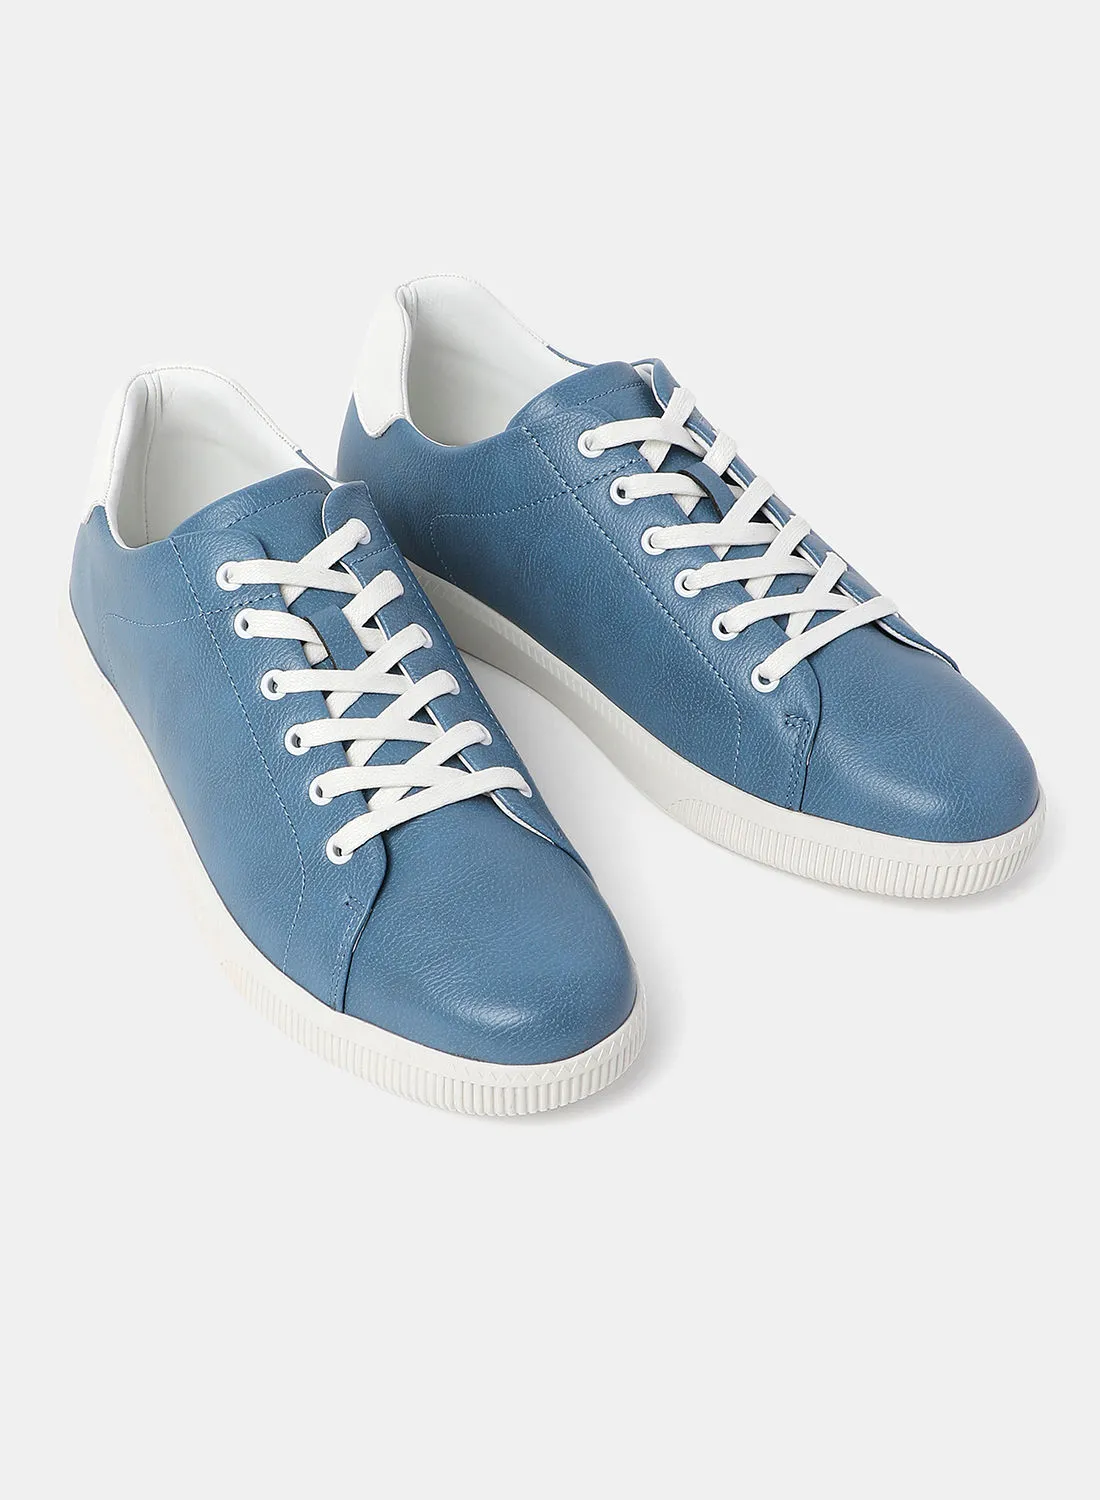 Athletiq Low Top Sneakers Blue